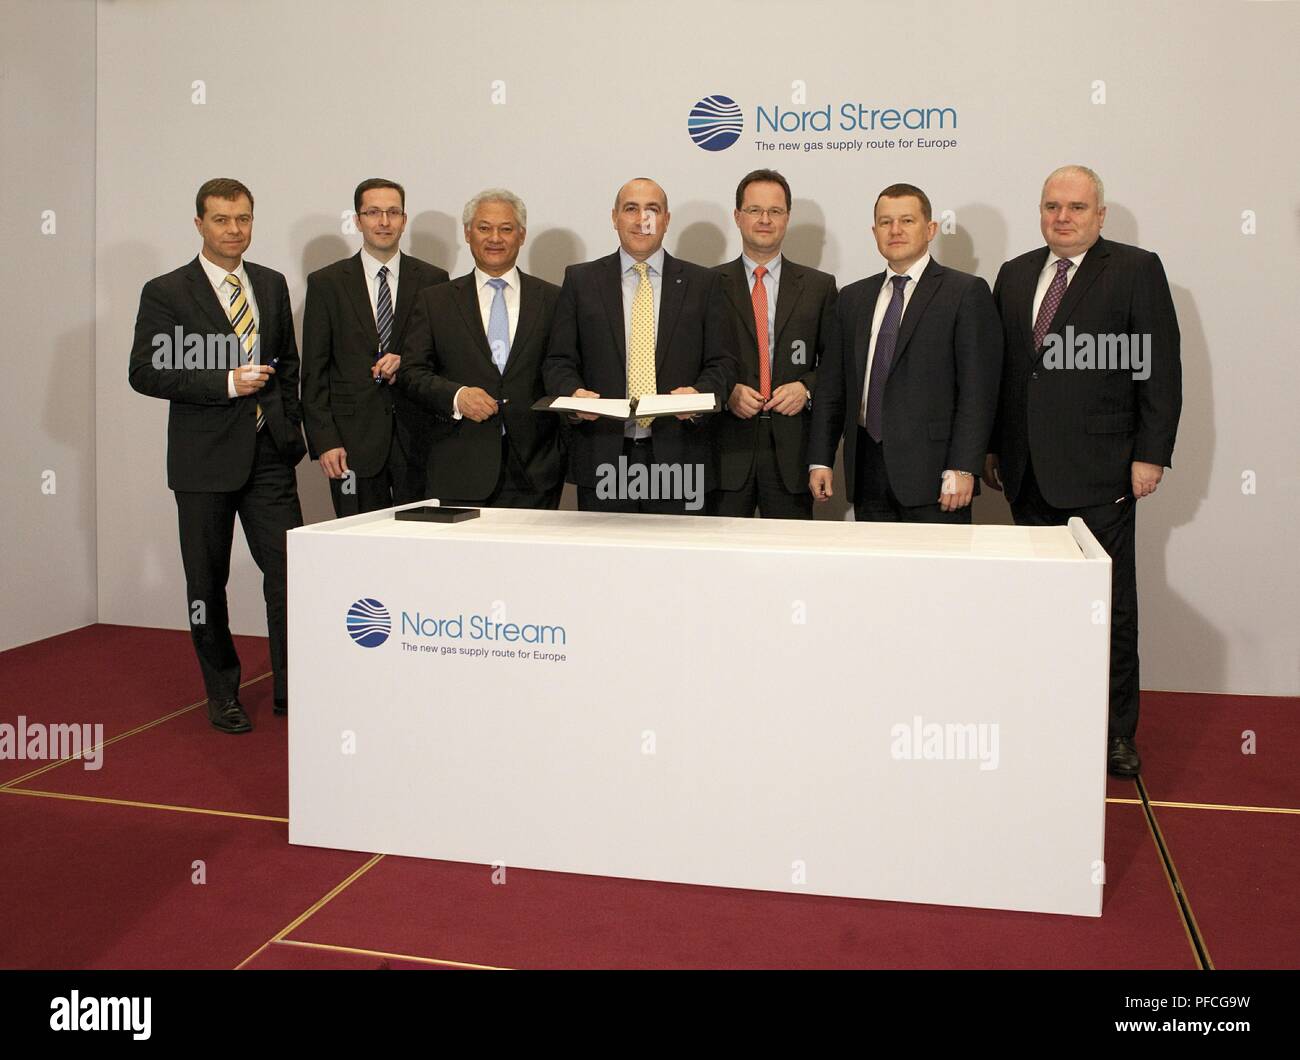 Russia. 21st Aug, 2018. Financing for the Nord Stream project is secured. Today, the company together with its shareholders in the consortium announced the successful signing of Phase II financing of the pipeline project. The project financing for Phase II amounts to 2.5 billion euros. From right to left: Matthias Warnig (Managing Director Nord Stream AG), Andrey Kruglov (Deputy Chairman of the Management Committee and Head of the Department for Finance and Economics Gazprom), Dr. Thomas Knig (Member of the Board of Management Credit: Nord Stream Ag/Russian Look/ZUMA Wire/Alamy Live News Stock Photo